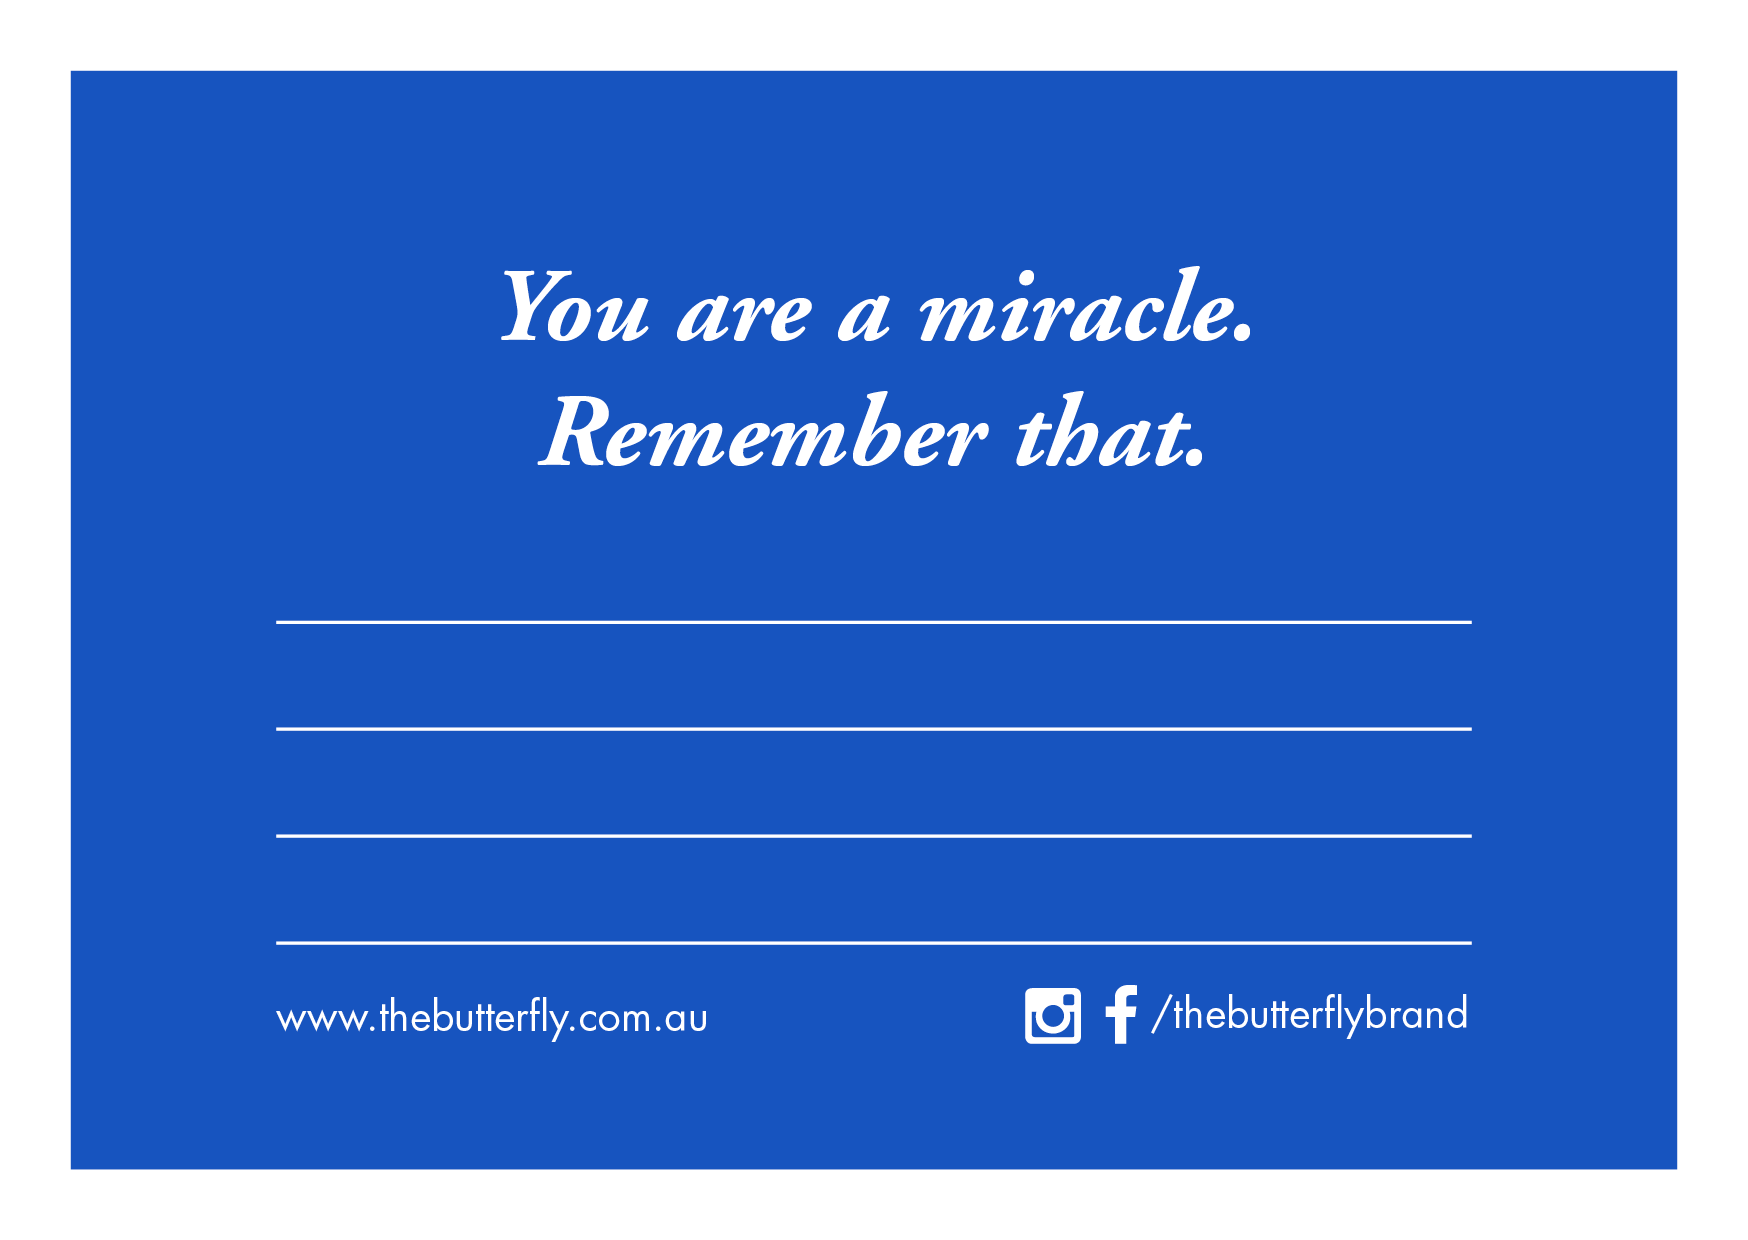 Blue card, with lines for a message and a quote across the top: "You are a miracle. Remember that."